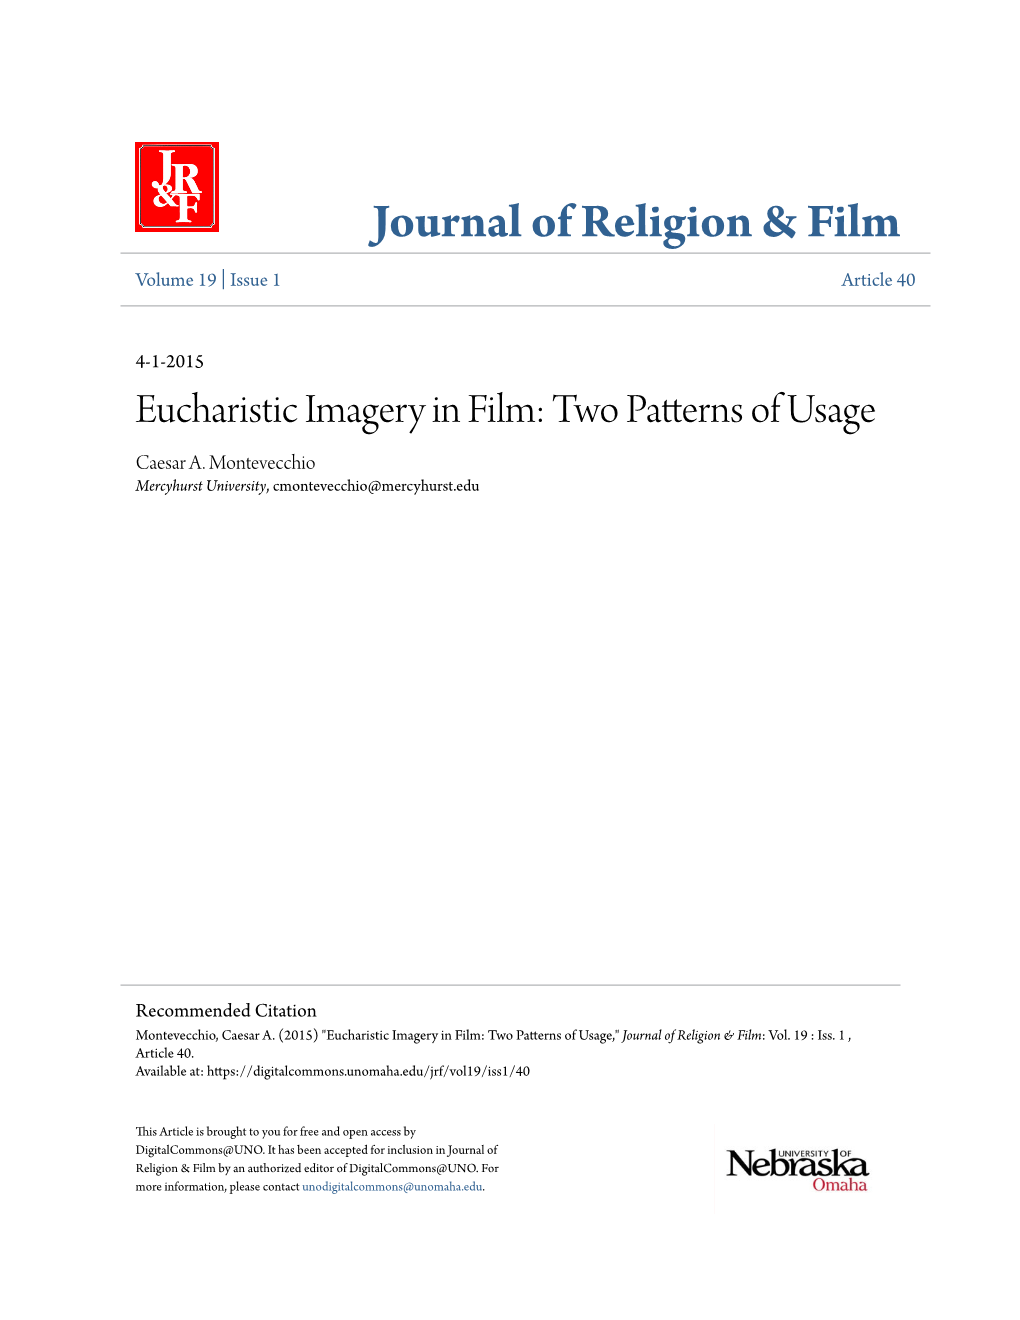 Eucharistic Imagery in Film: Two Patterns of Usage Caesar A